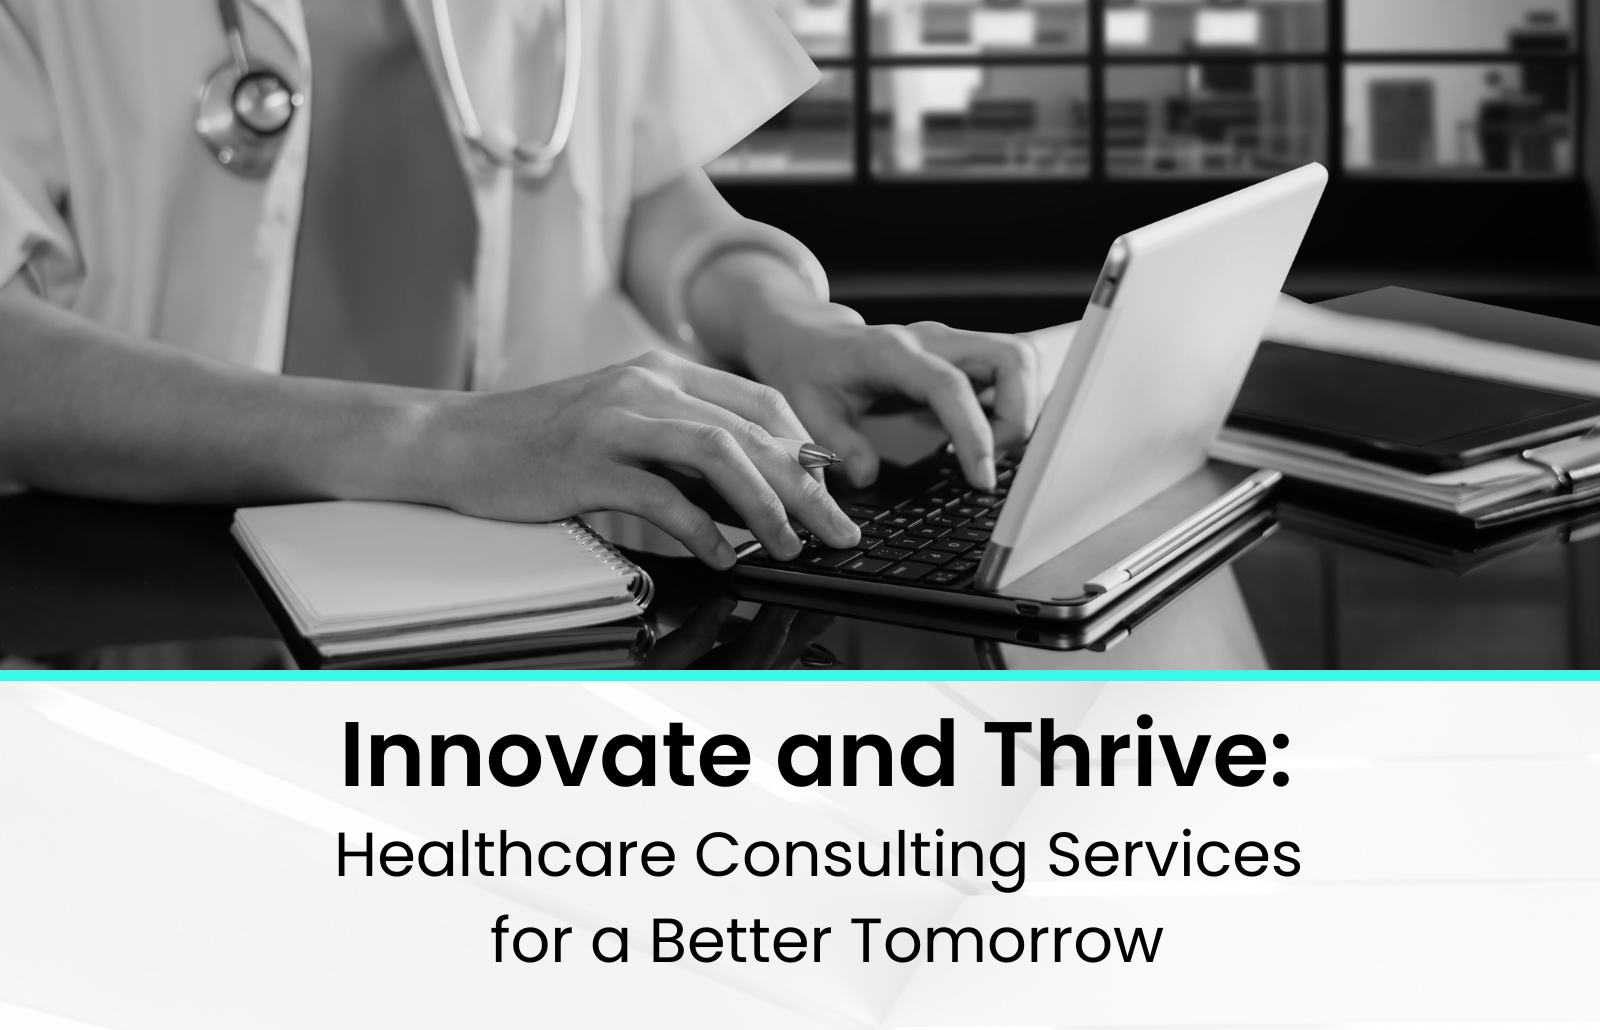 Healthcare Consulting Services on a laptop